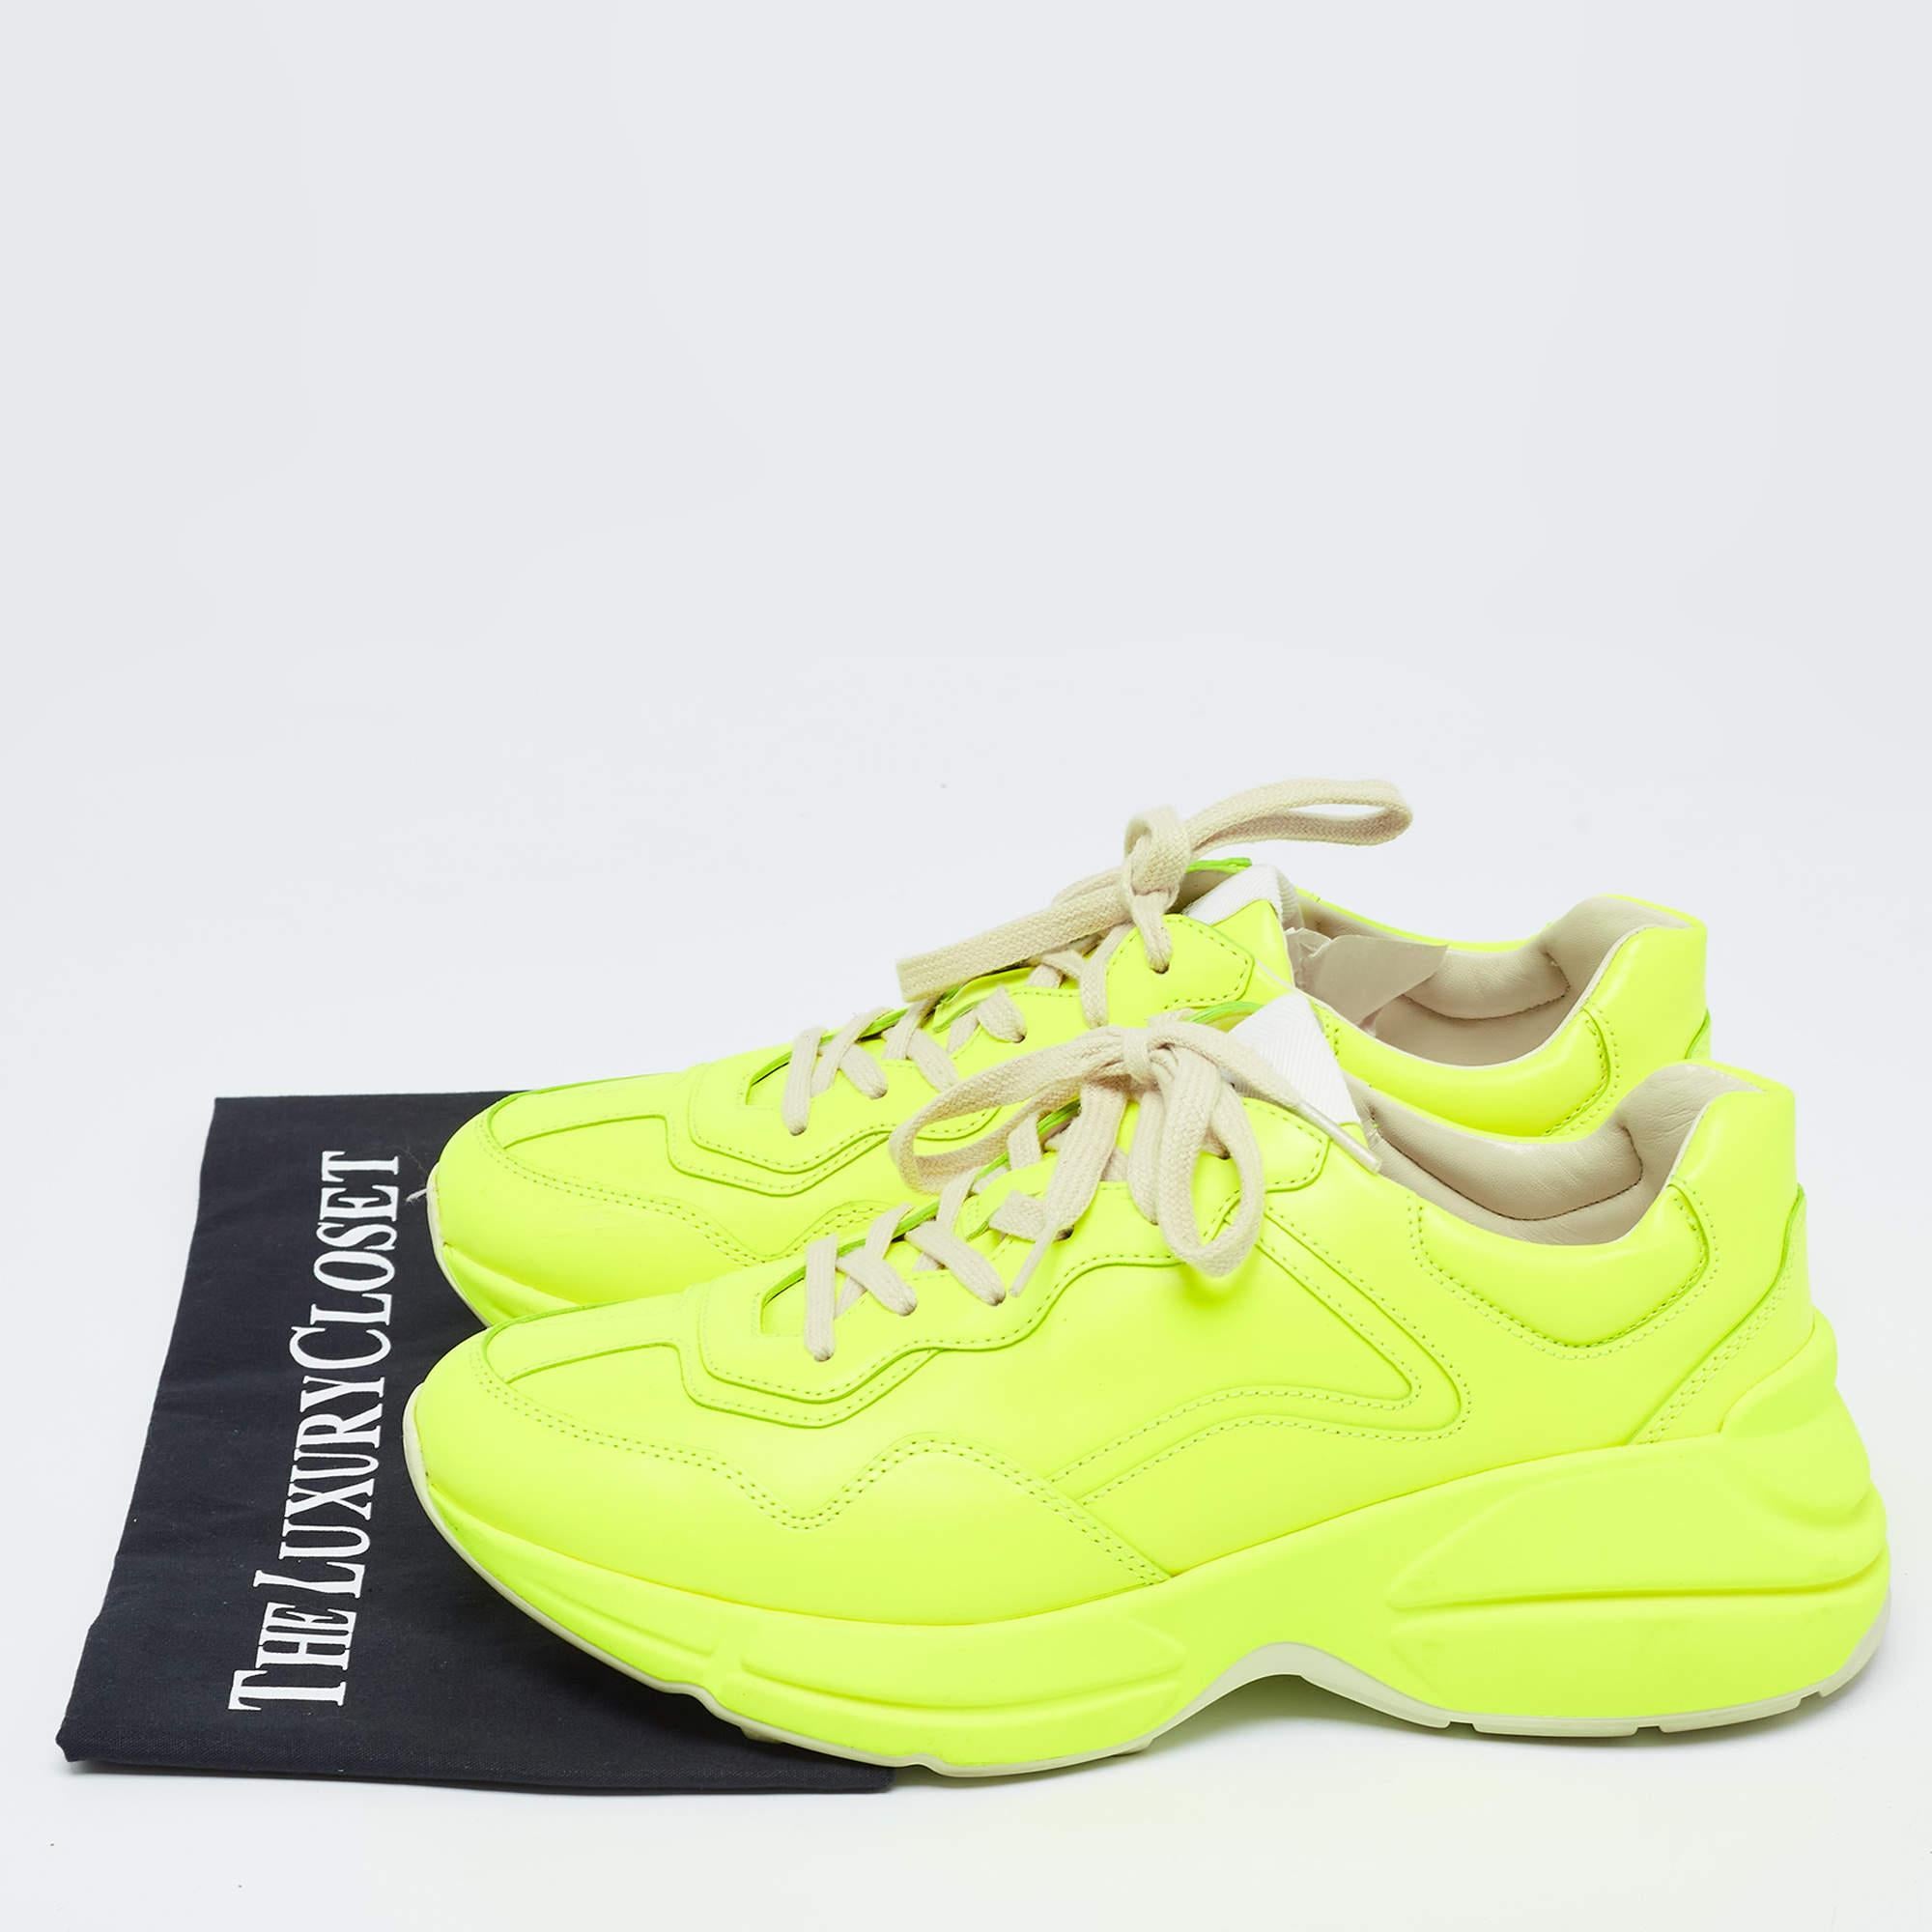 Gucci Neon Yellow Leather Rhyton Sneakers Size 39 For Sale 5